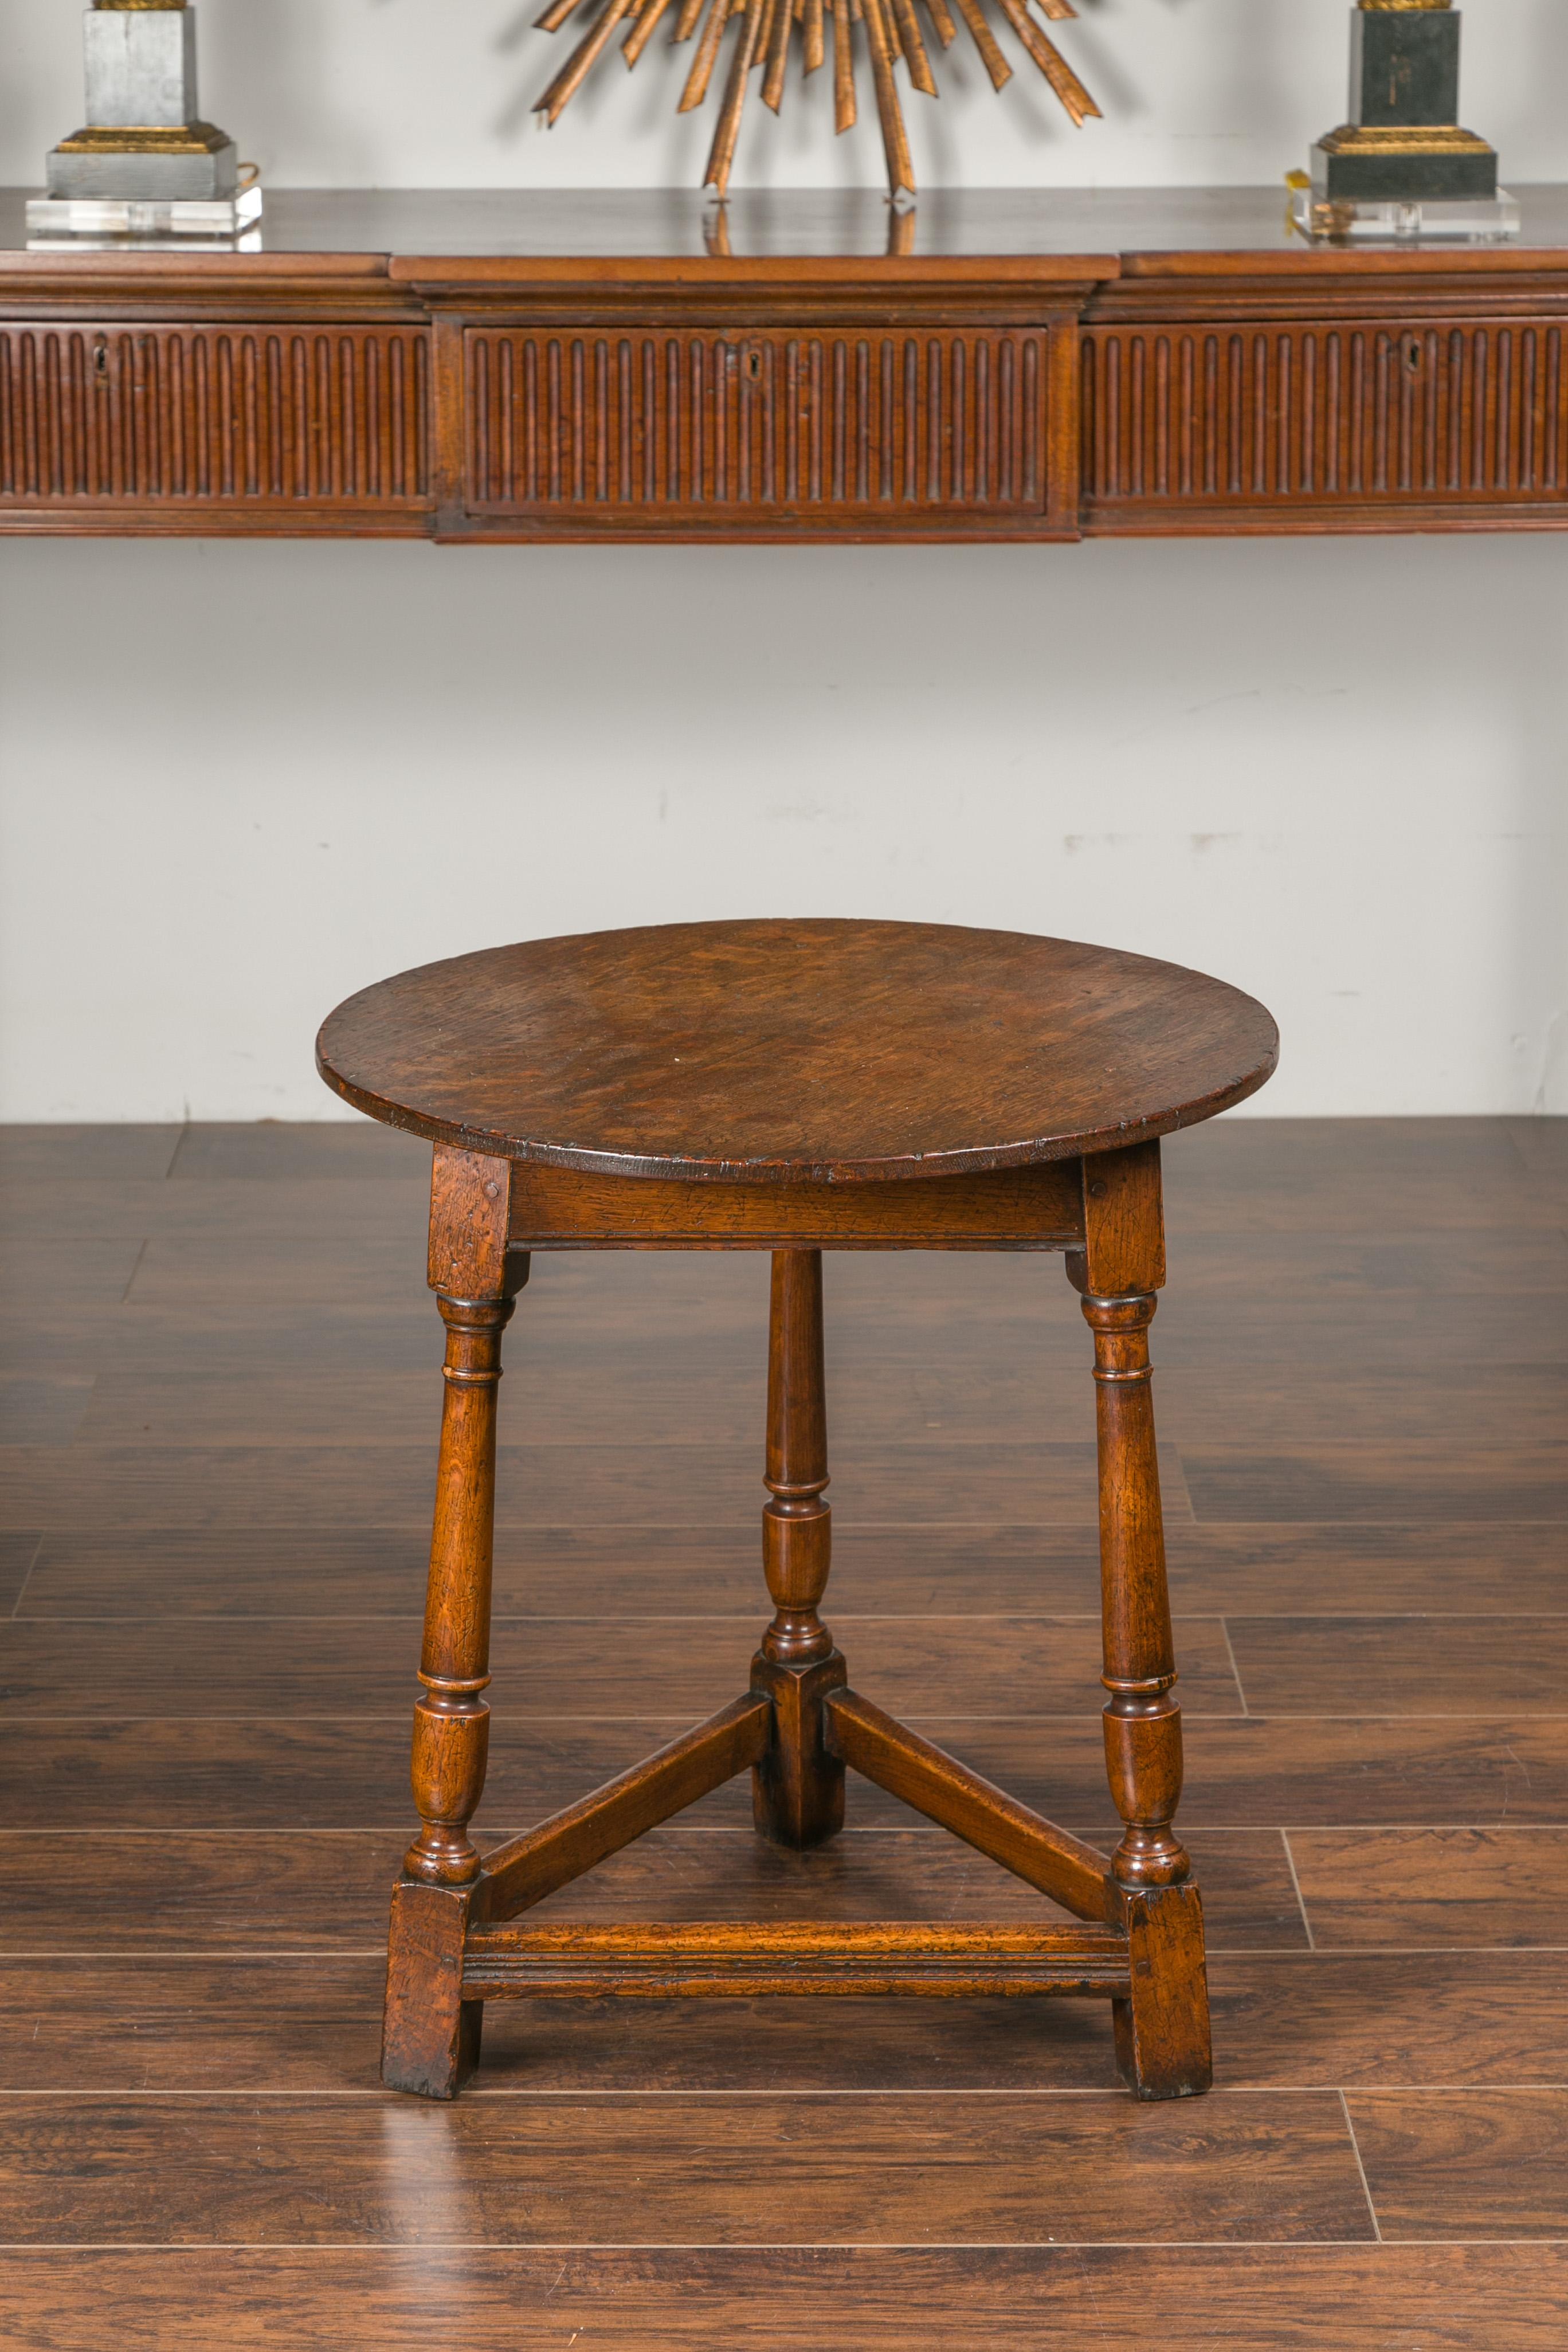 English 1840s Oak Cricket Table with Circular Top, Turned Legs and Stretchers 6